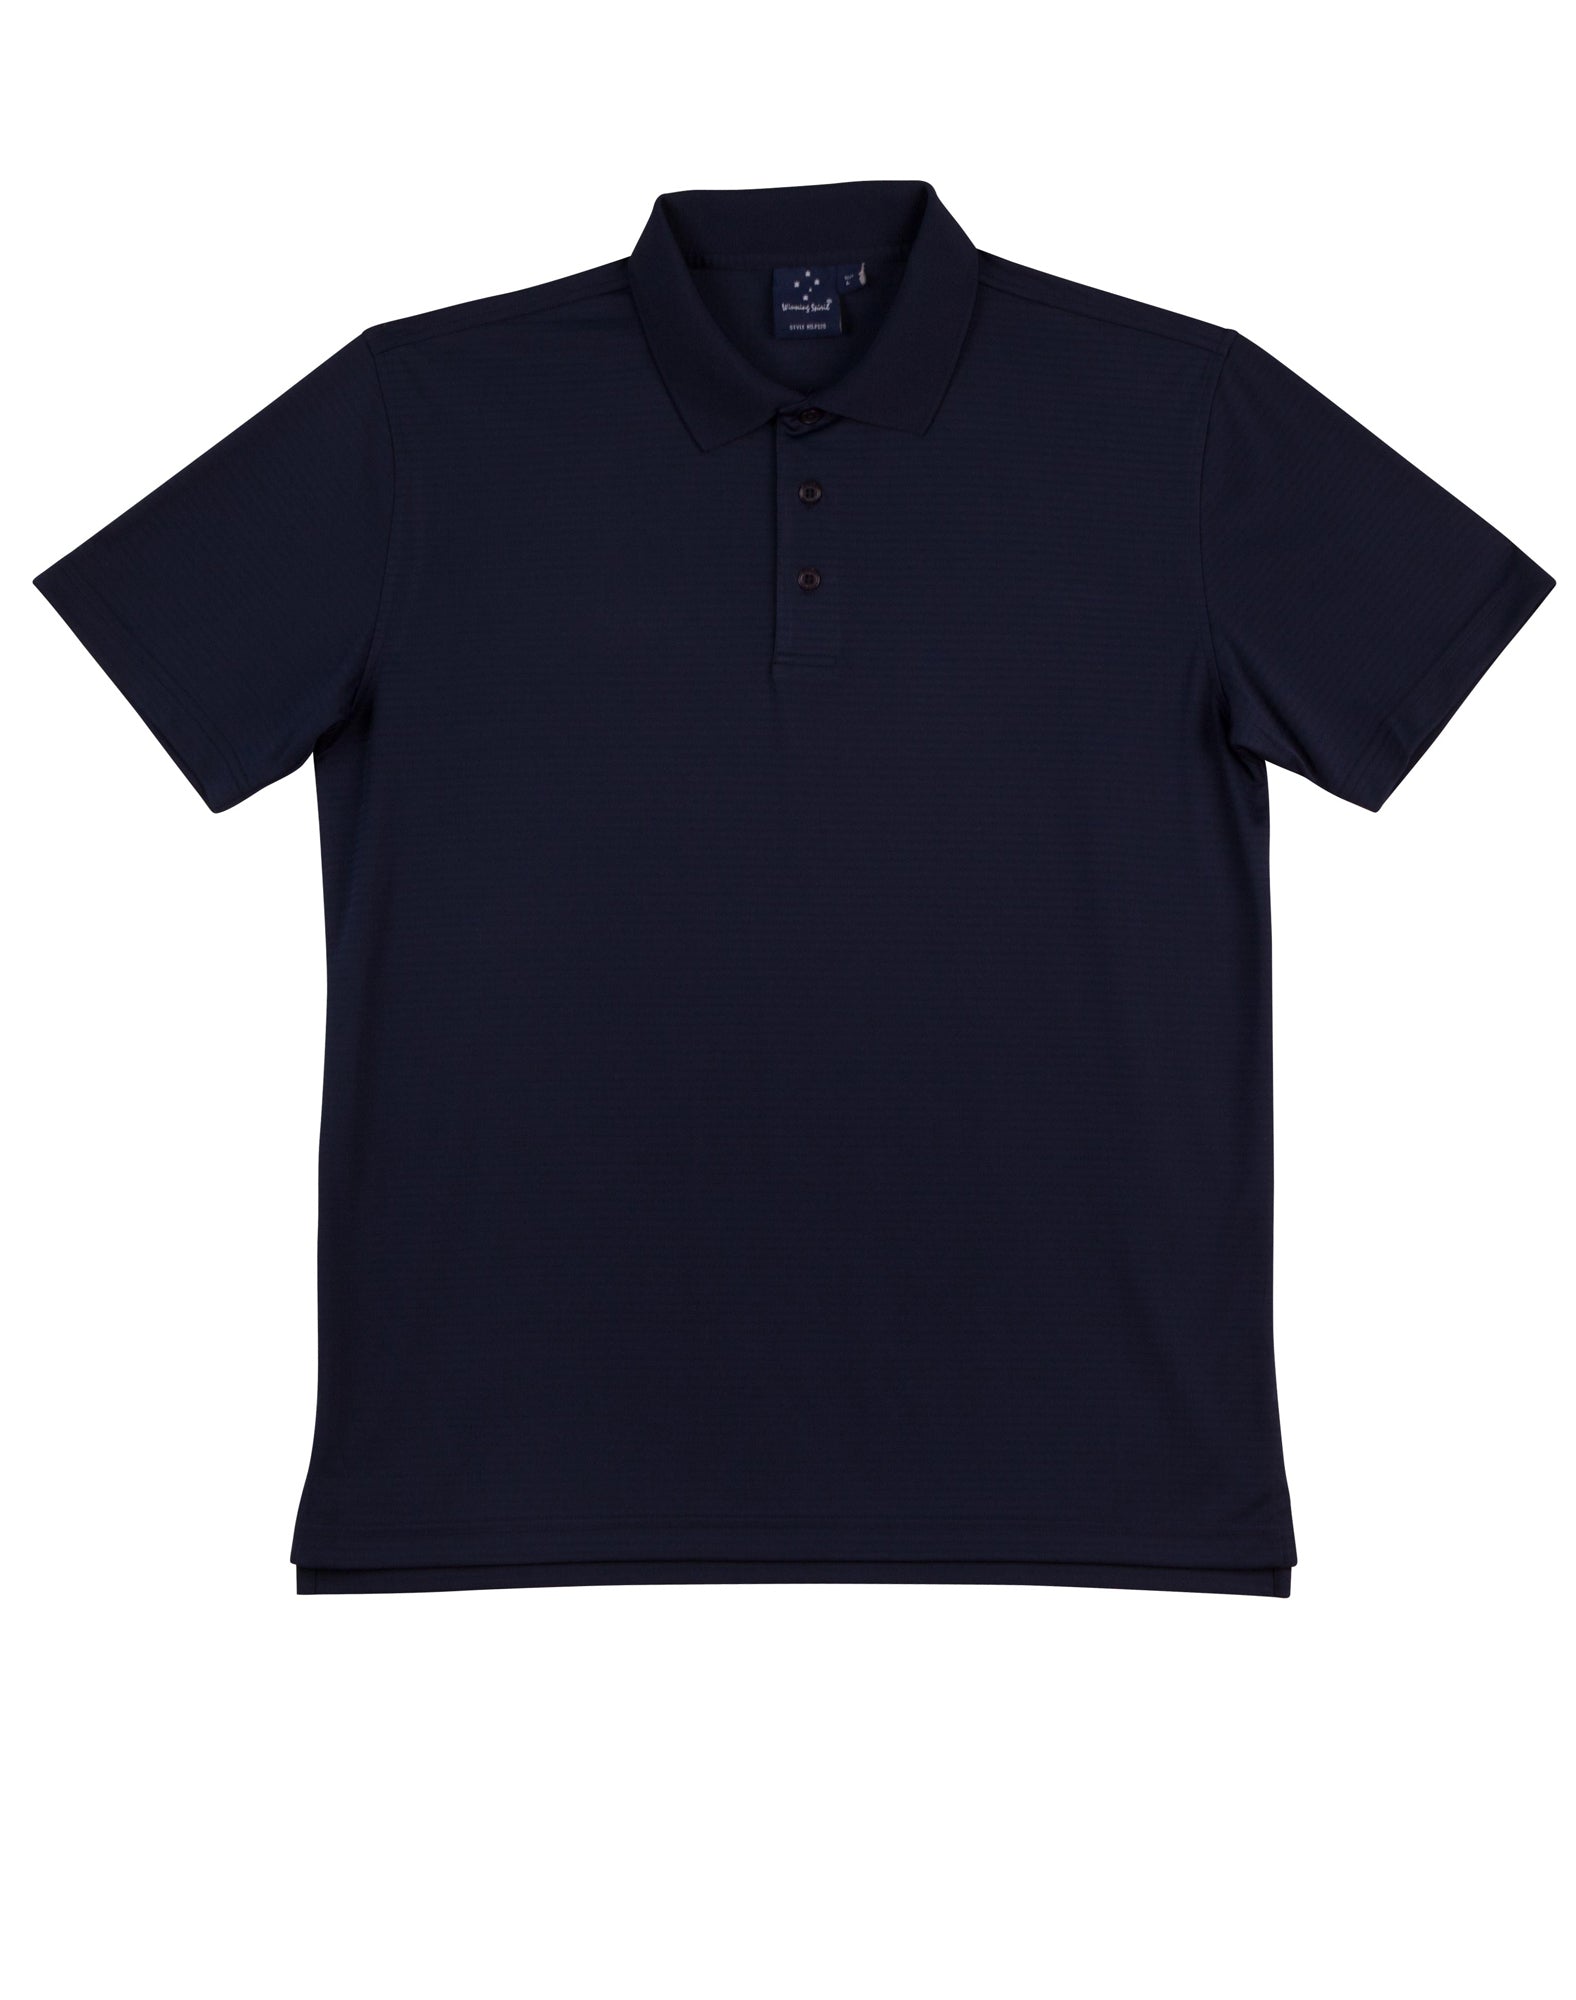 [PS75] Men's Cooldry Textured Polo